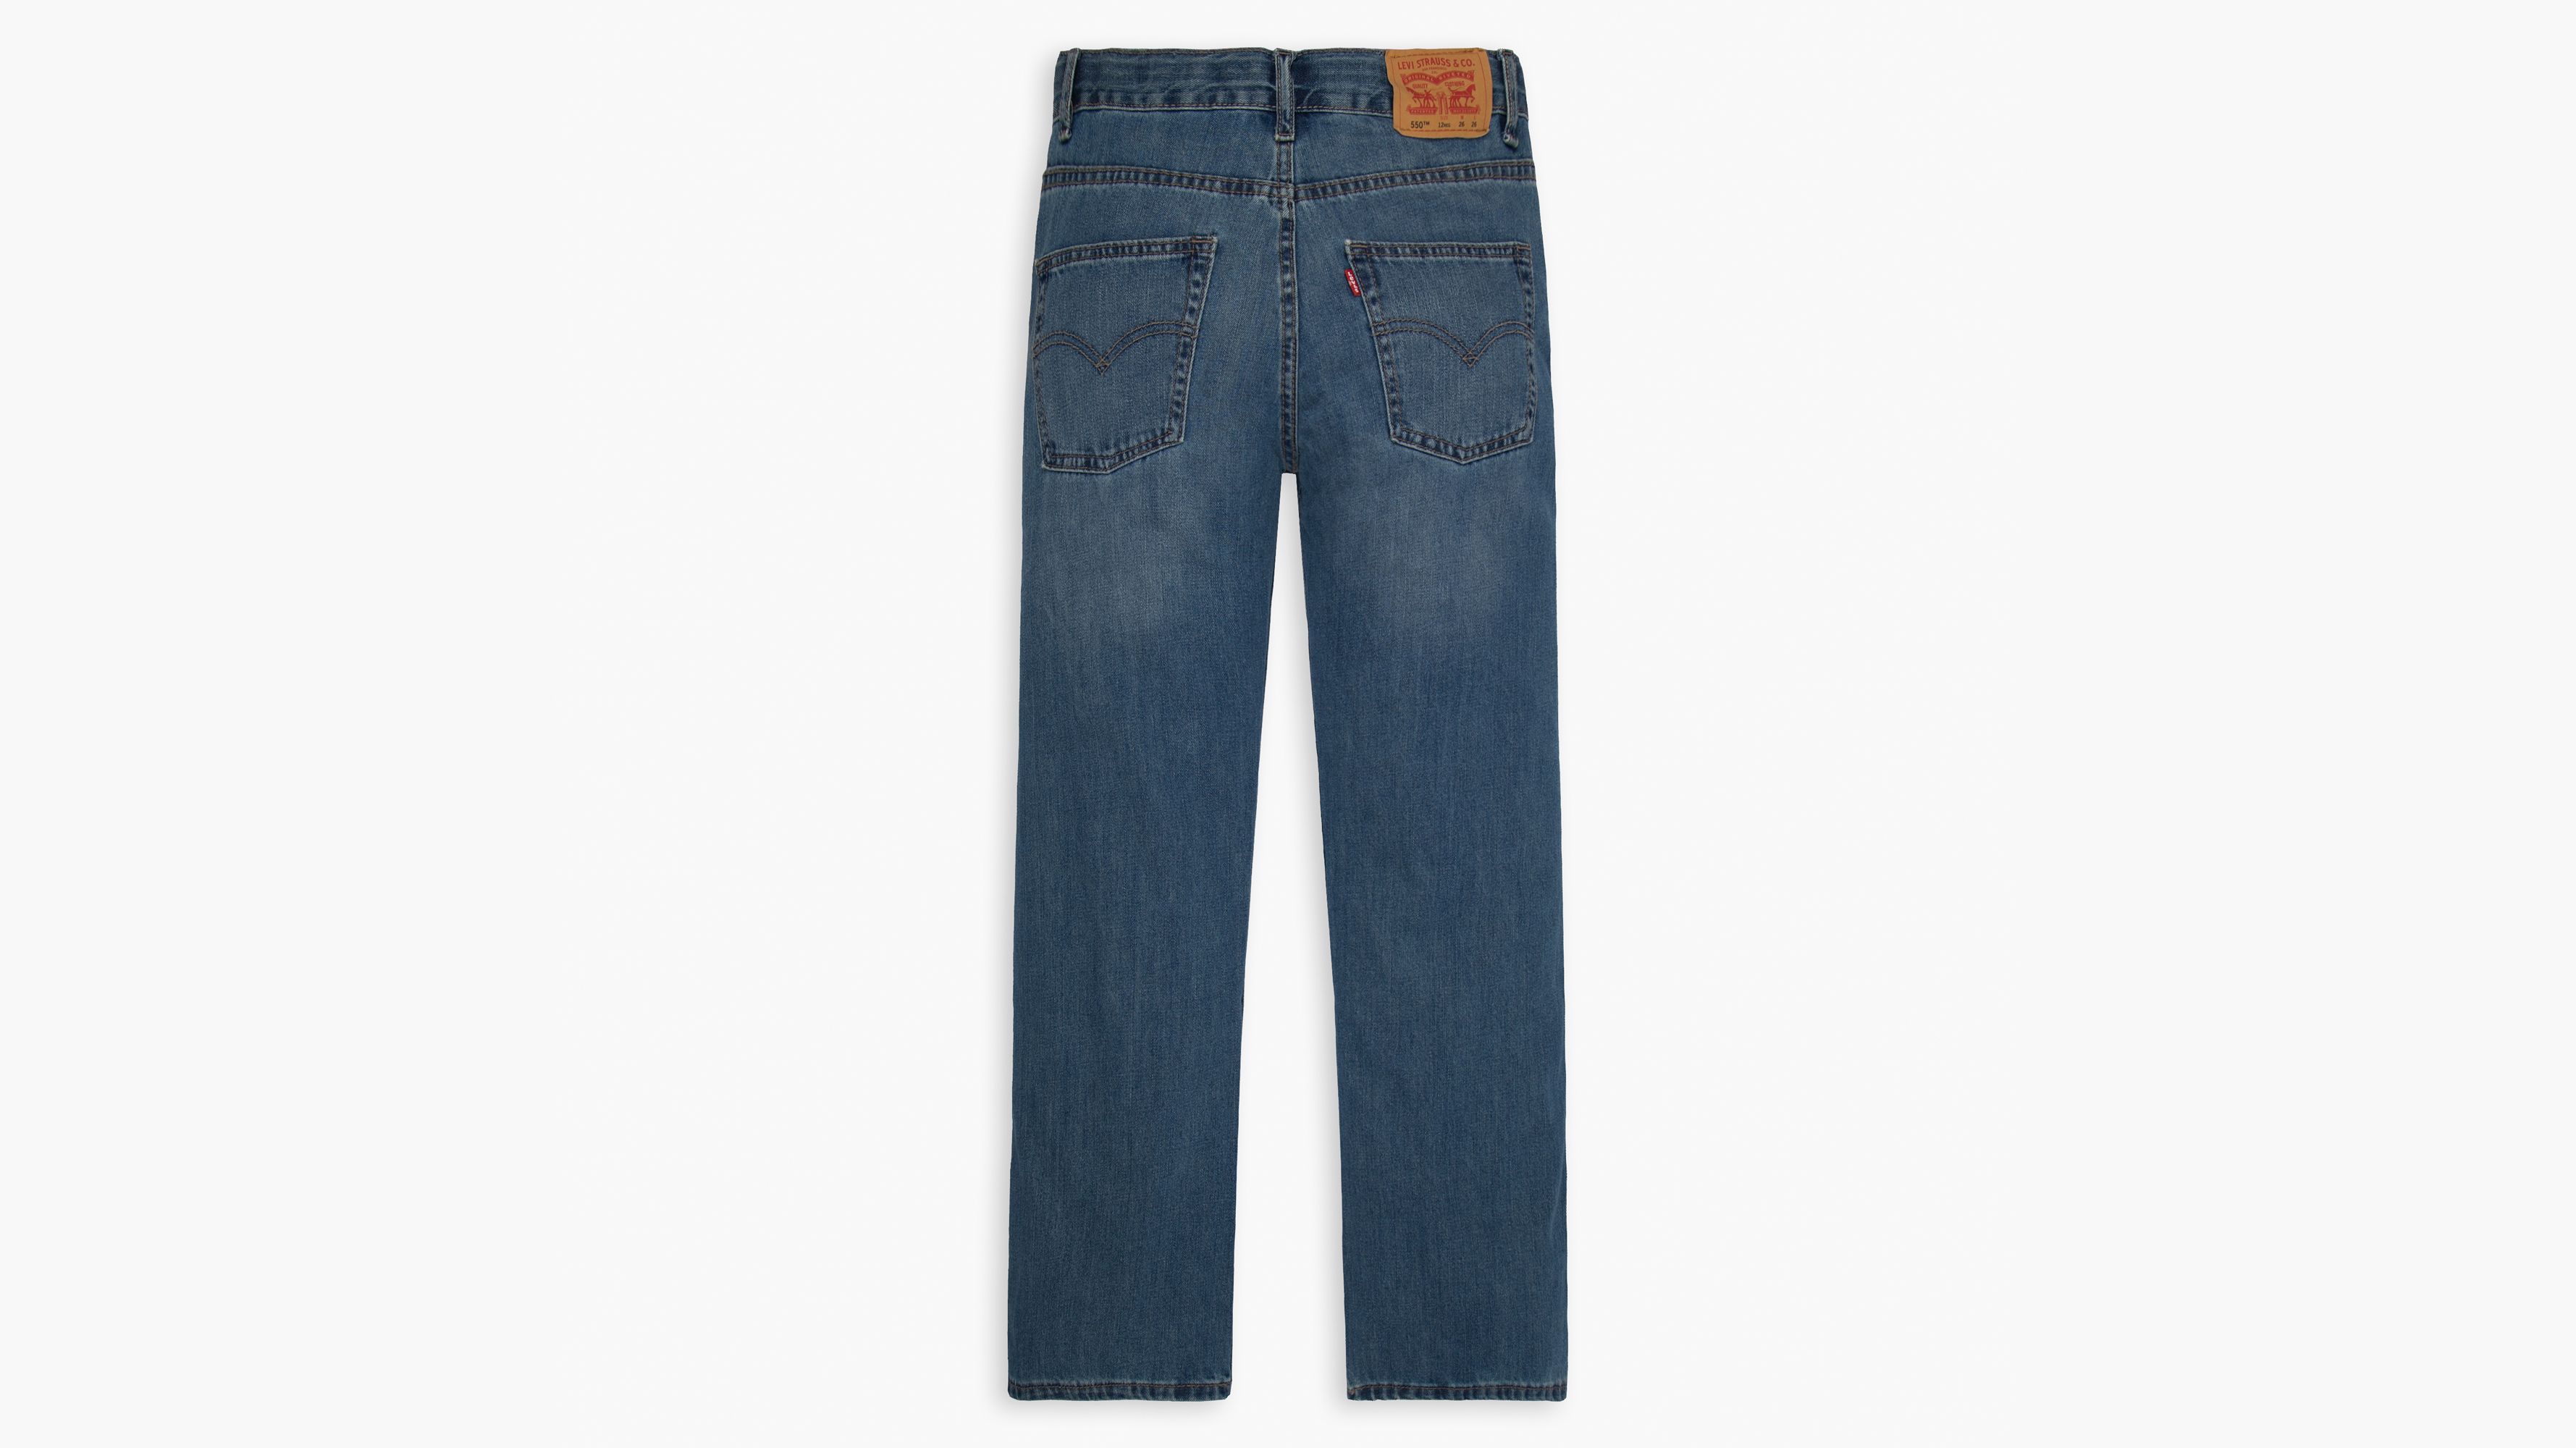 550™ Relaxed Fit Big Boys Jeans 8-20 - Light Wash | Levi's® US